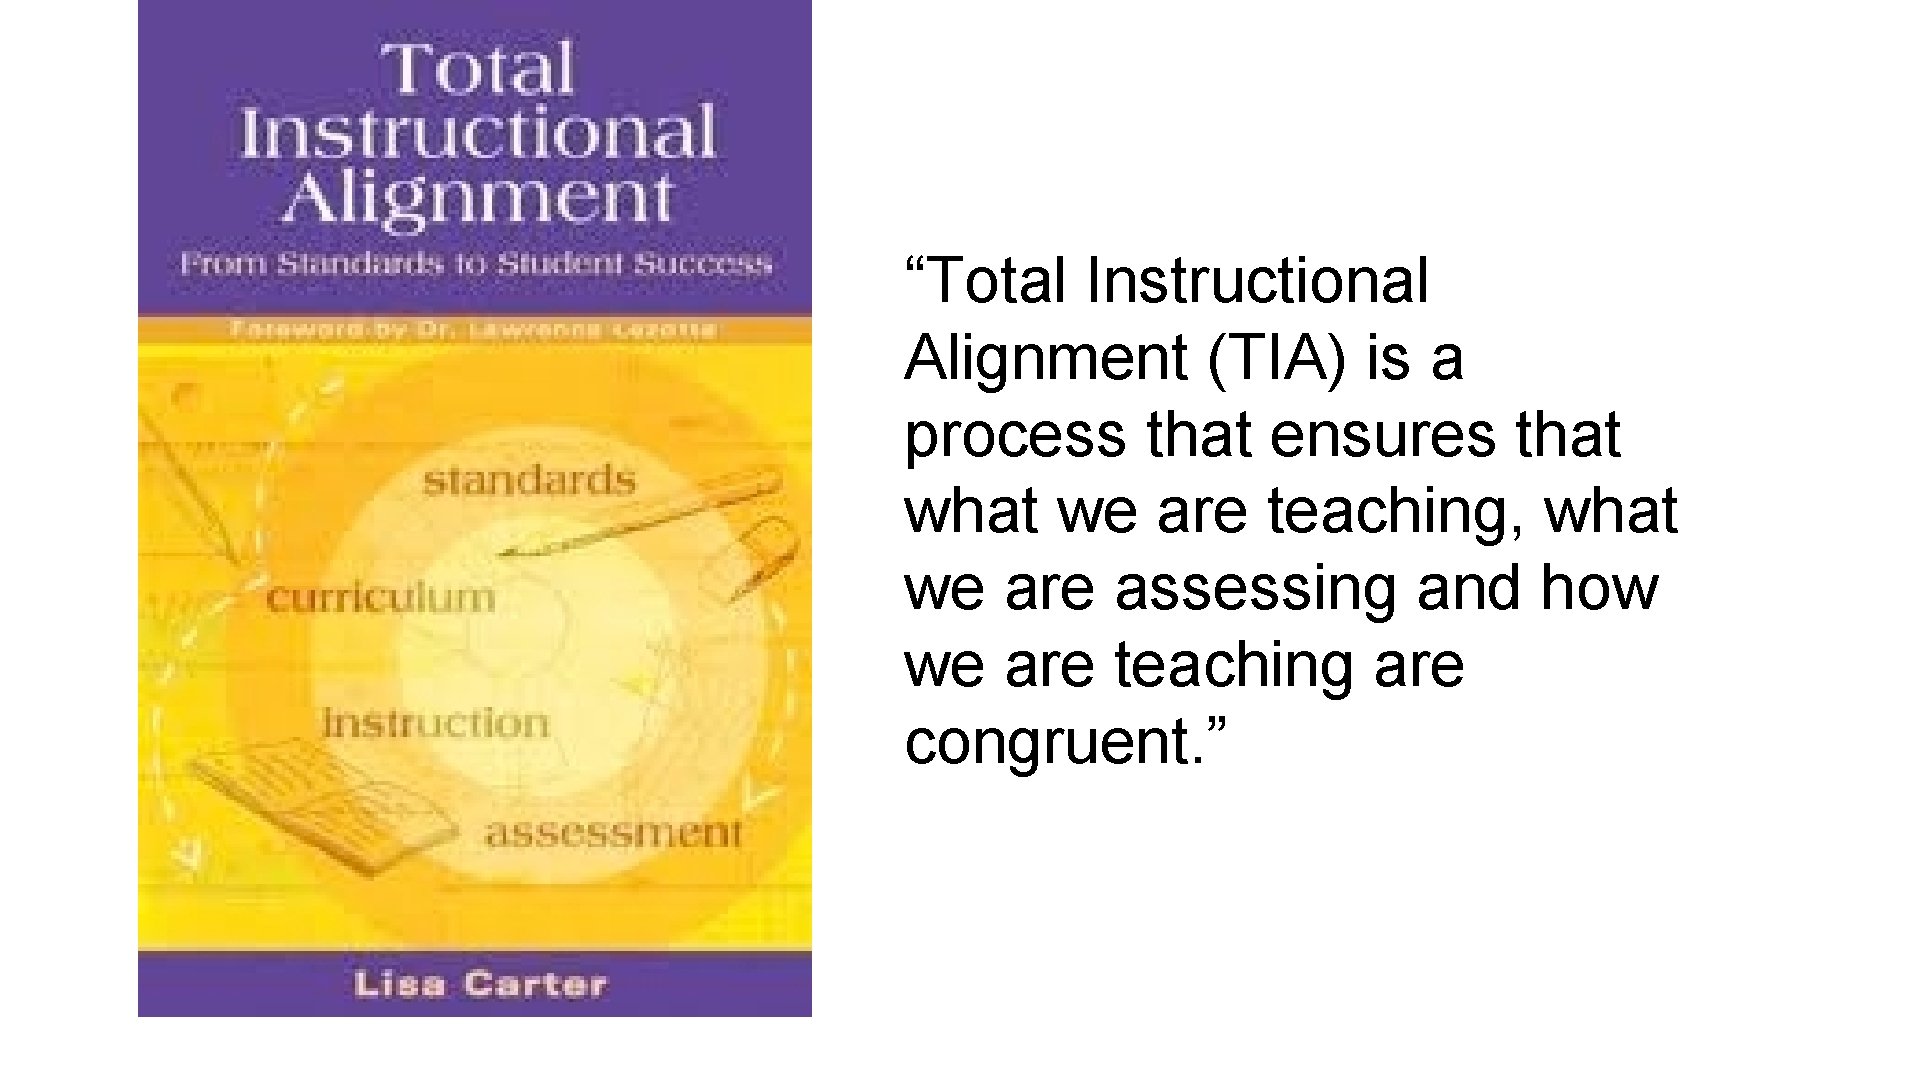 “Total Instructional Alignment (TIA) is a process that ensures that we are teaching, what